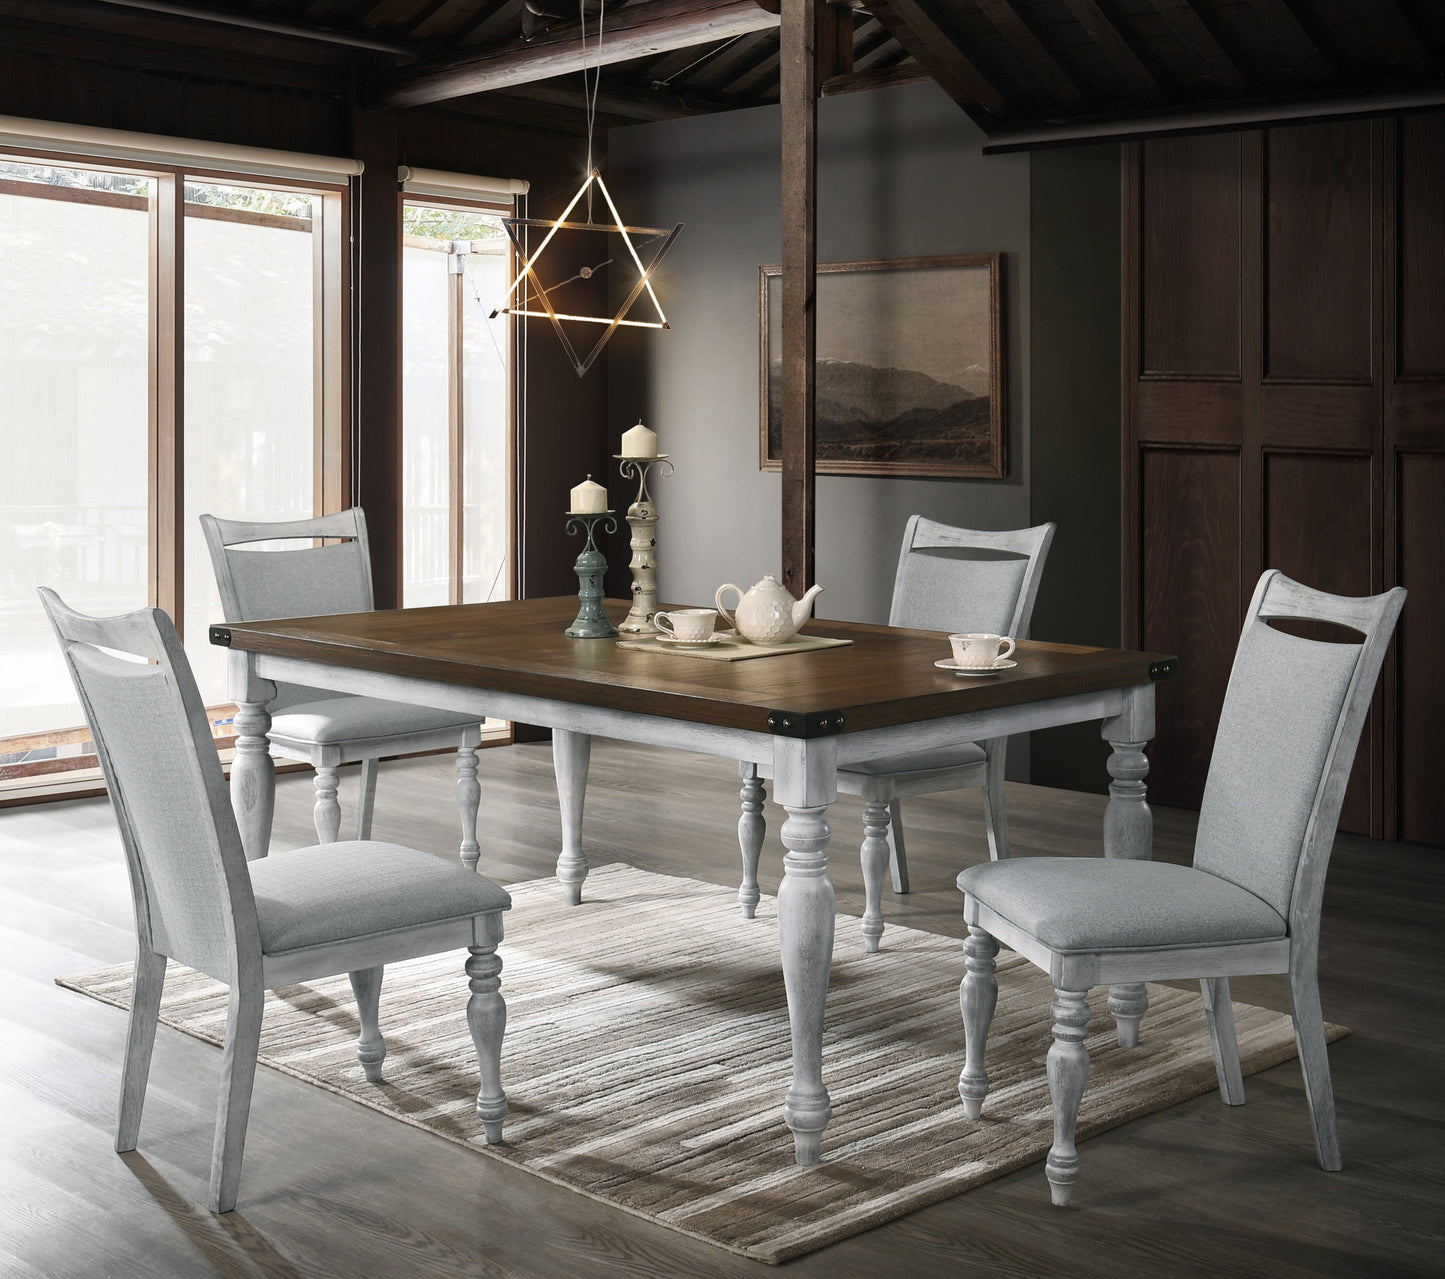 Salines 5 Piece Dining Table Set with 4 Upholstered Chairs, Rustic White and Oak